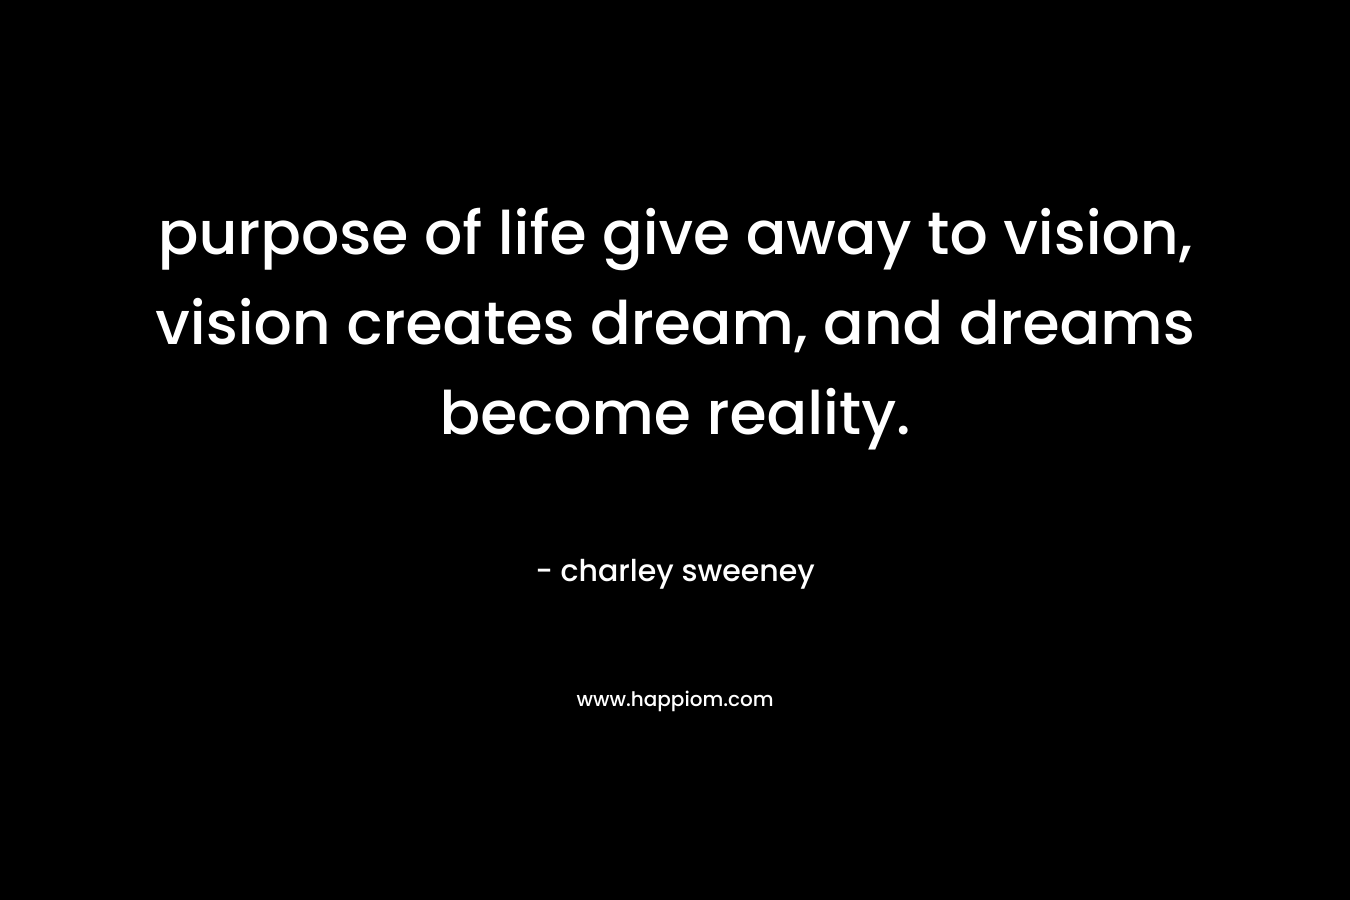 purpose of life give away to vision, vision creates dream, and dreams become reality.